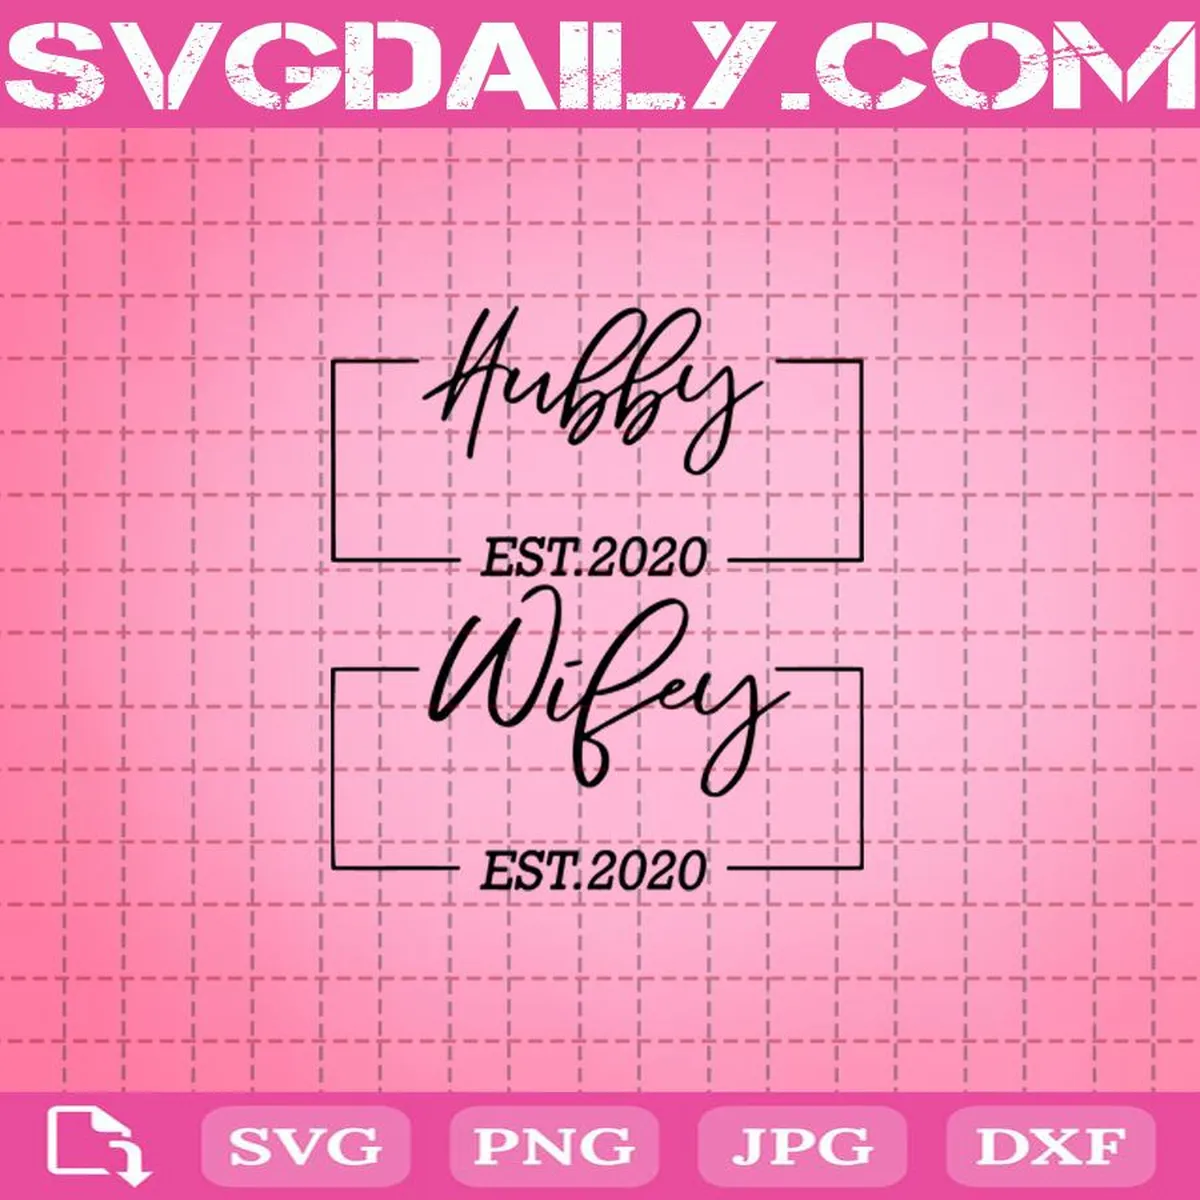 Hubby And Wifey Est 2021 Svg, Hubby Wifey Svg, Mr & Mrs Svg, Wedding Svg, Marriage Svg, Hubby Wifey Married Svg